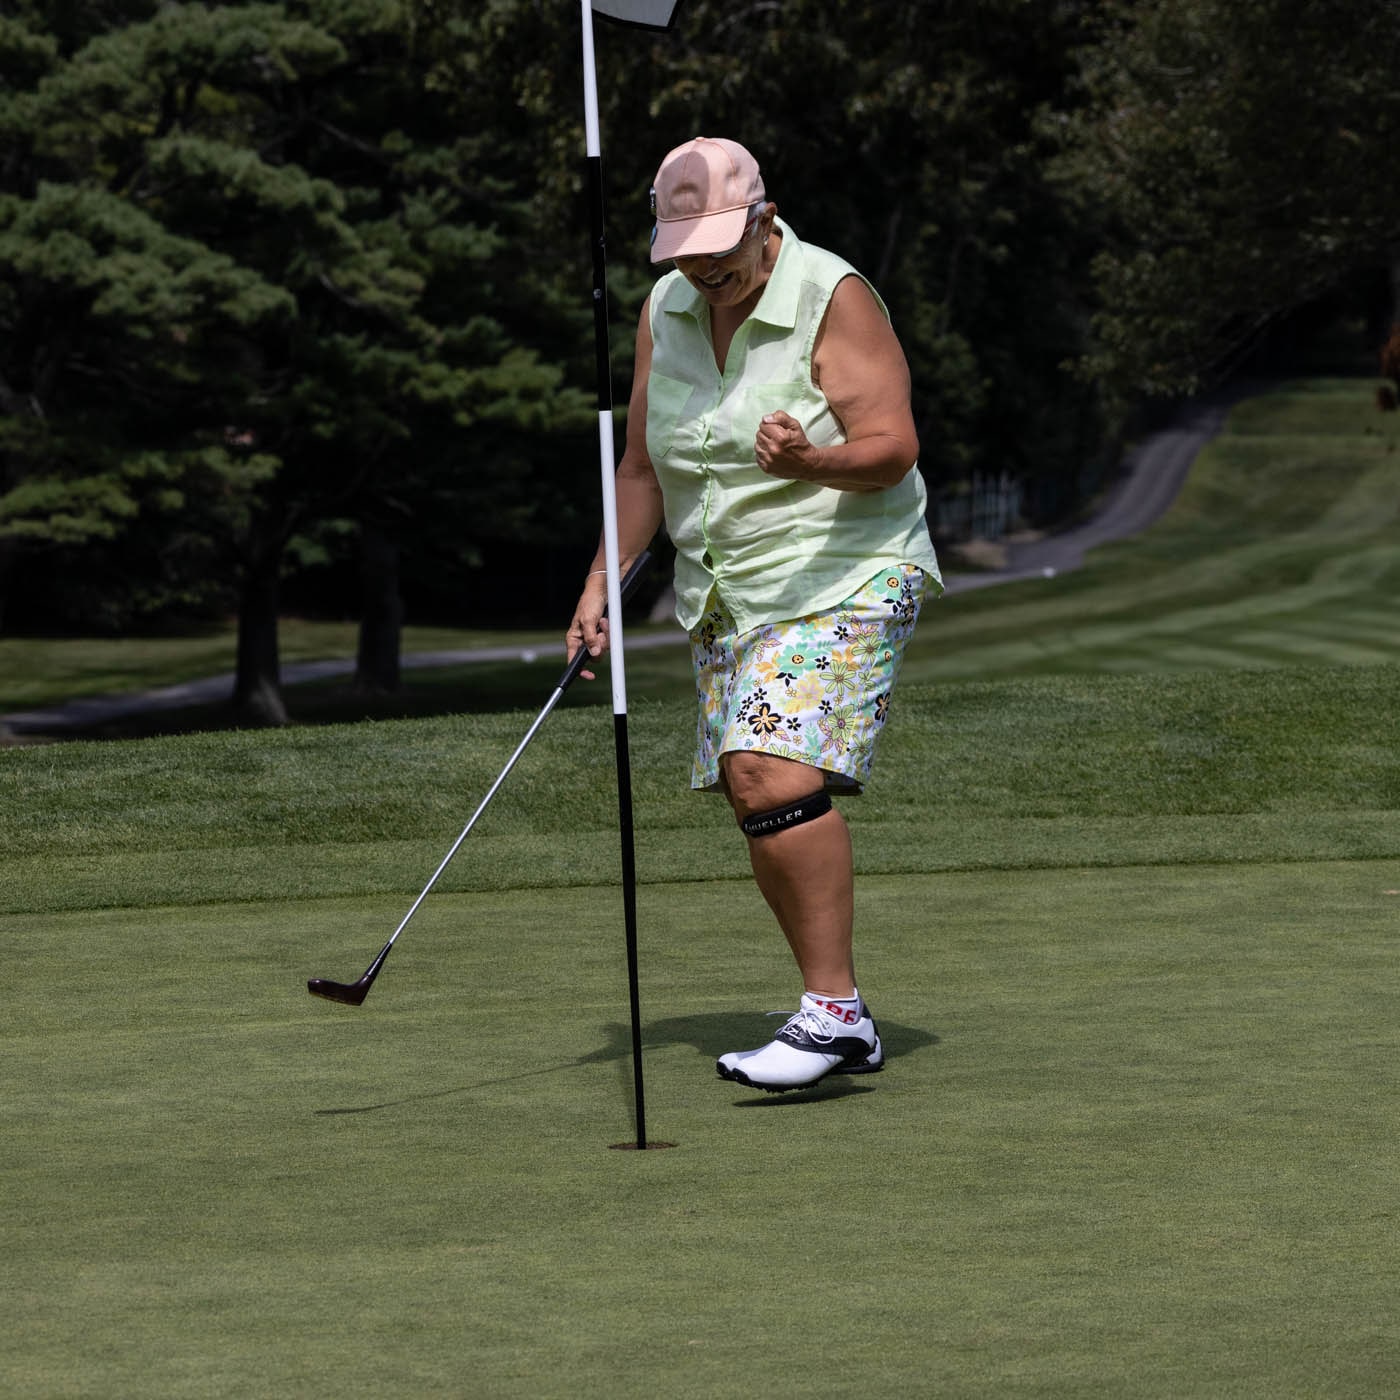 Country-Club-Of-New-Bedford FB-2023-Womens-FB-Gallery August-2023-Country-Club-Of-New-Bedford-FB-2023-Womens-FB-Gallery August-2023-Womens-FB-Gallery-Thursday-Photos-Image-50